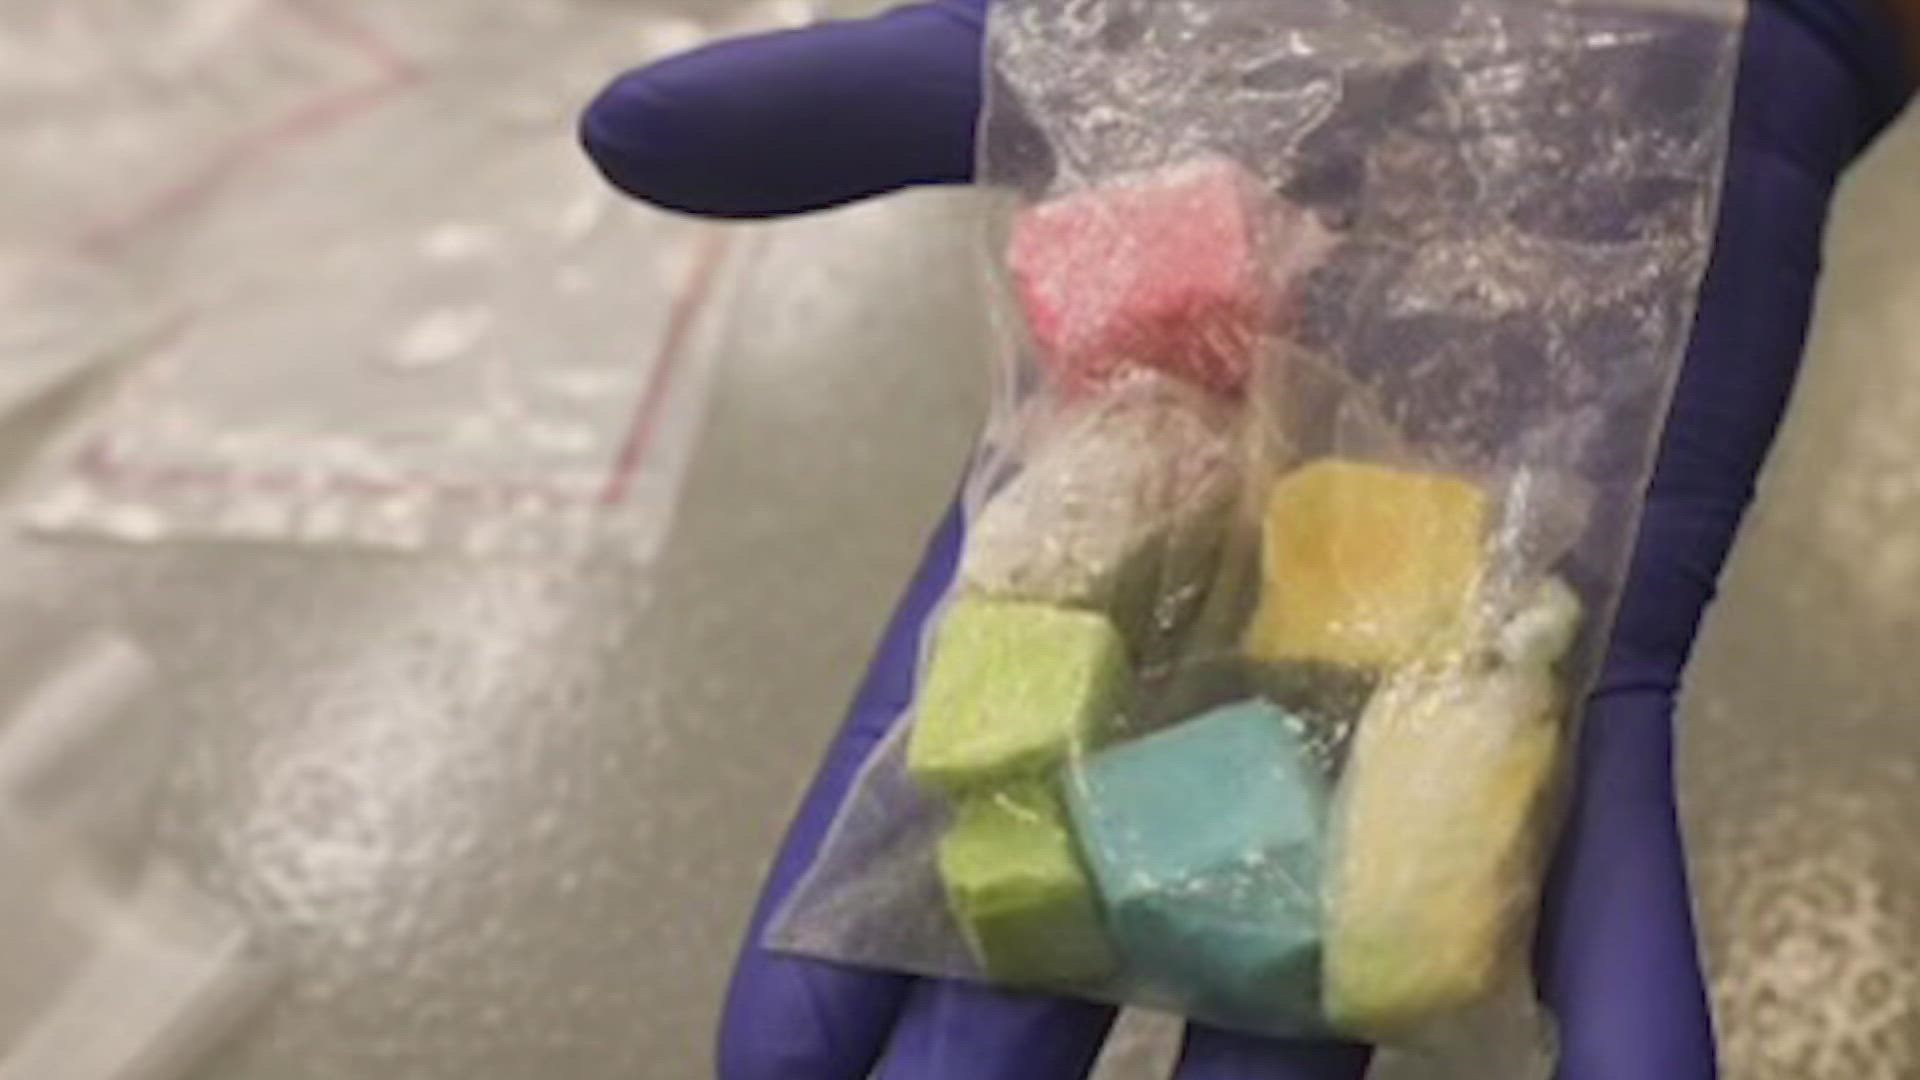 The U.S. Drug Enforcement Administration said that "rainbow fentanyl" has been found in 21 U.S. states so far, including one in New England: Maine.